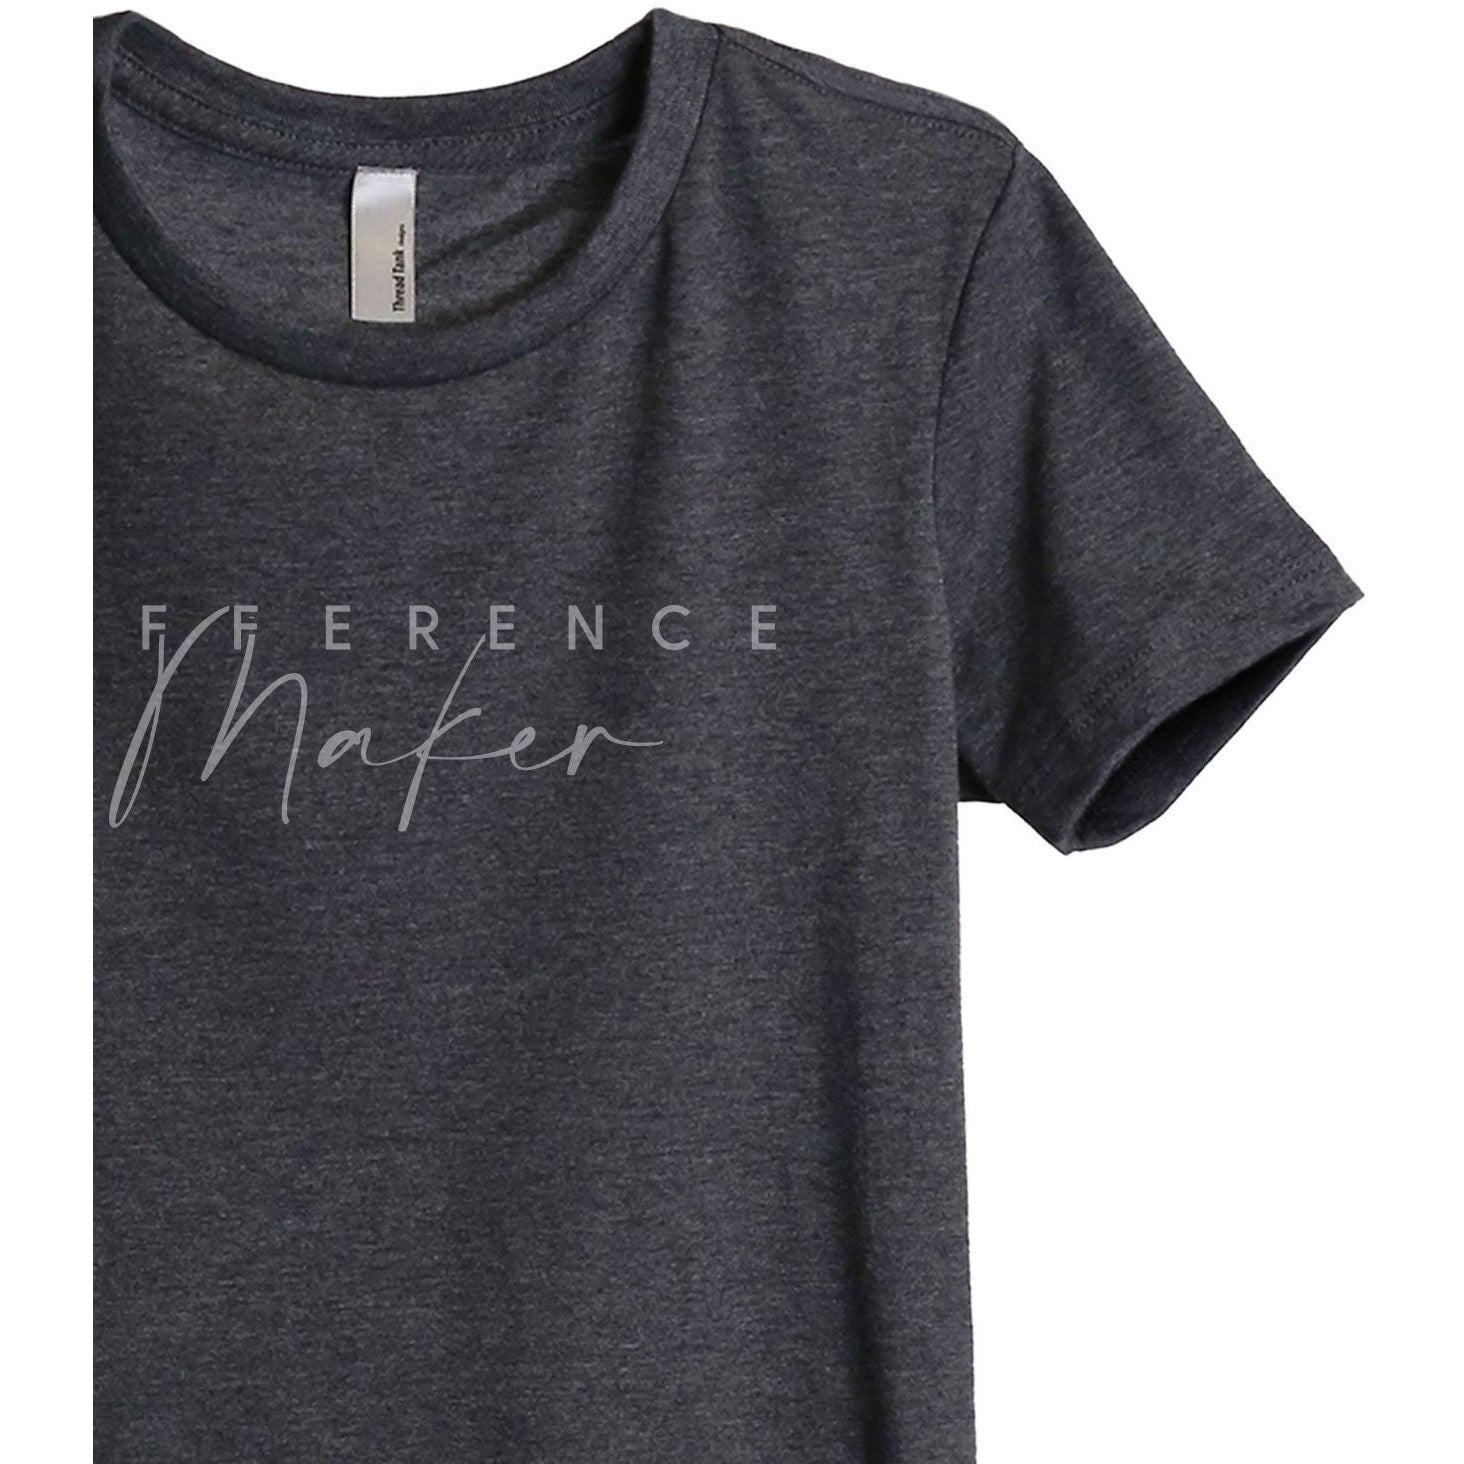 Difference Maker Women's Relaxed Crewneck T-Shirt Top Tee Charcoal Grey Zoom Details